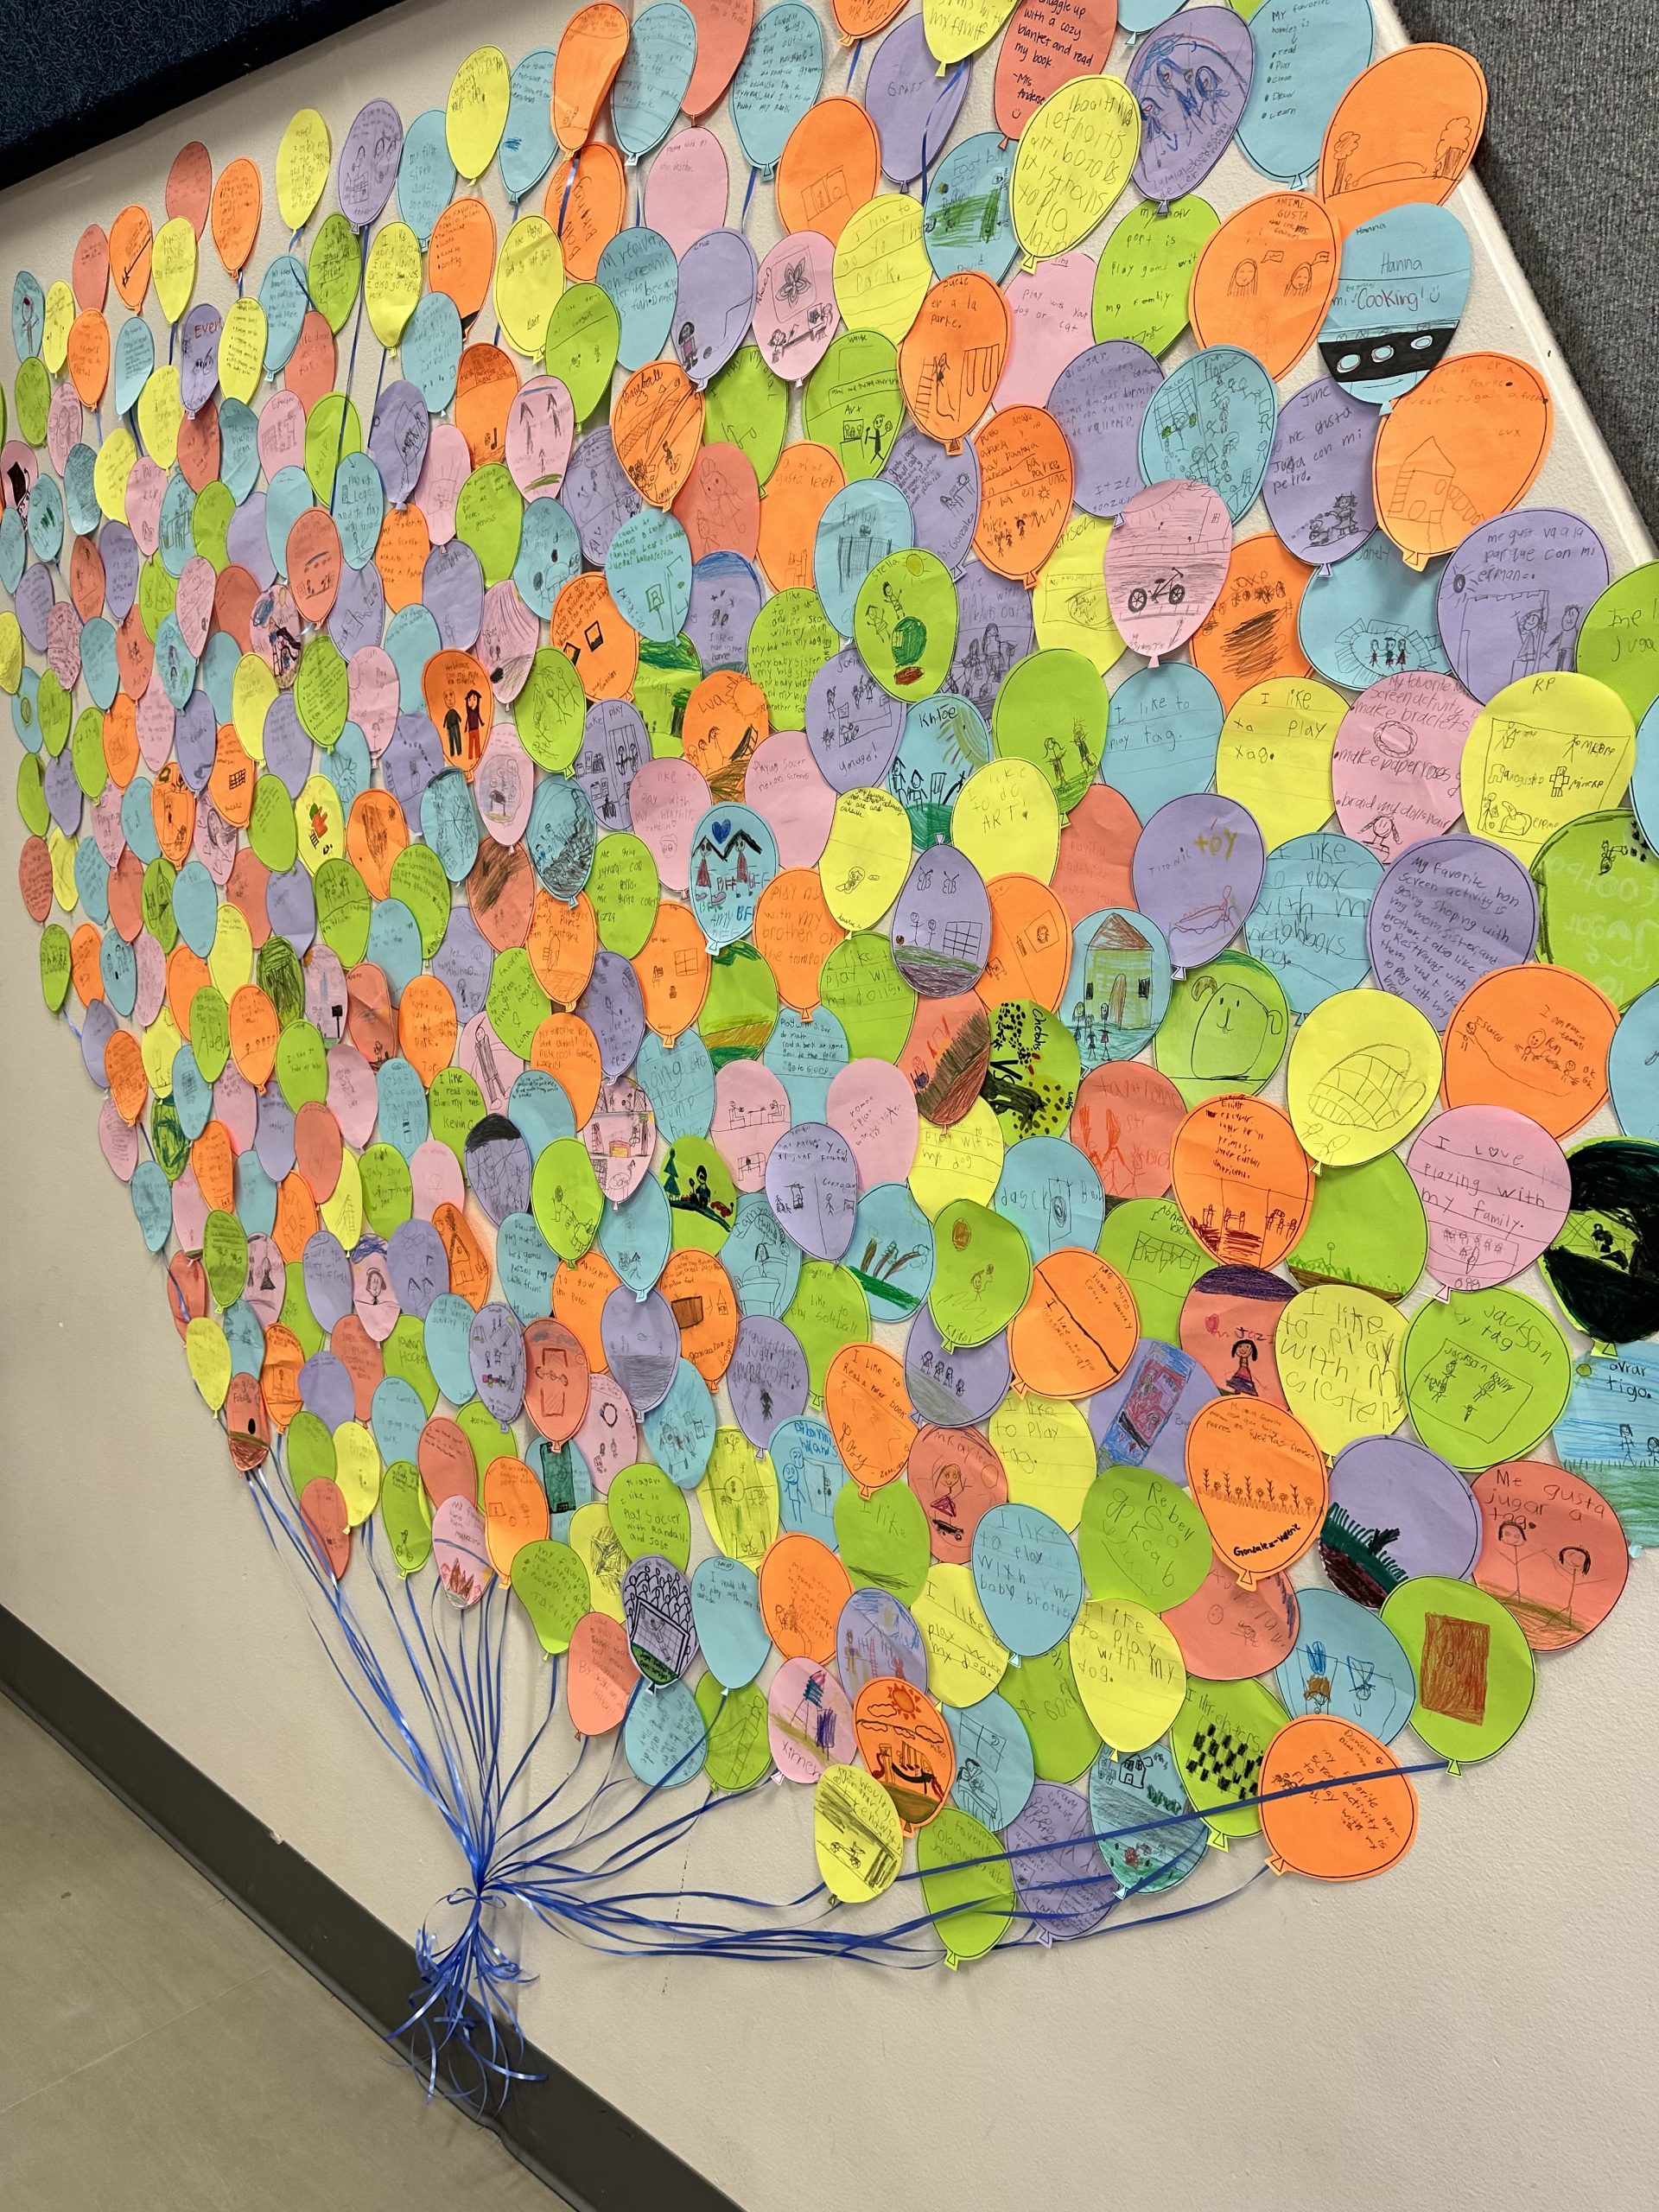 Many balloons shaped papers in different colors with student proclomations of what they like to do when they are not on electronics.